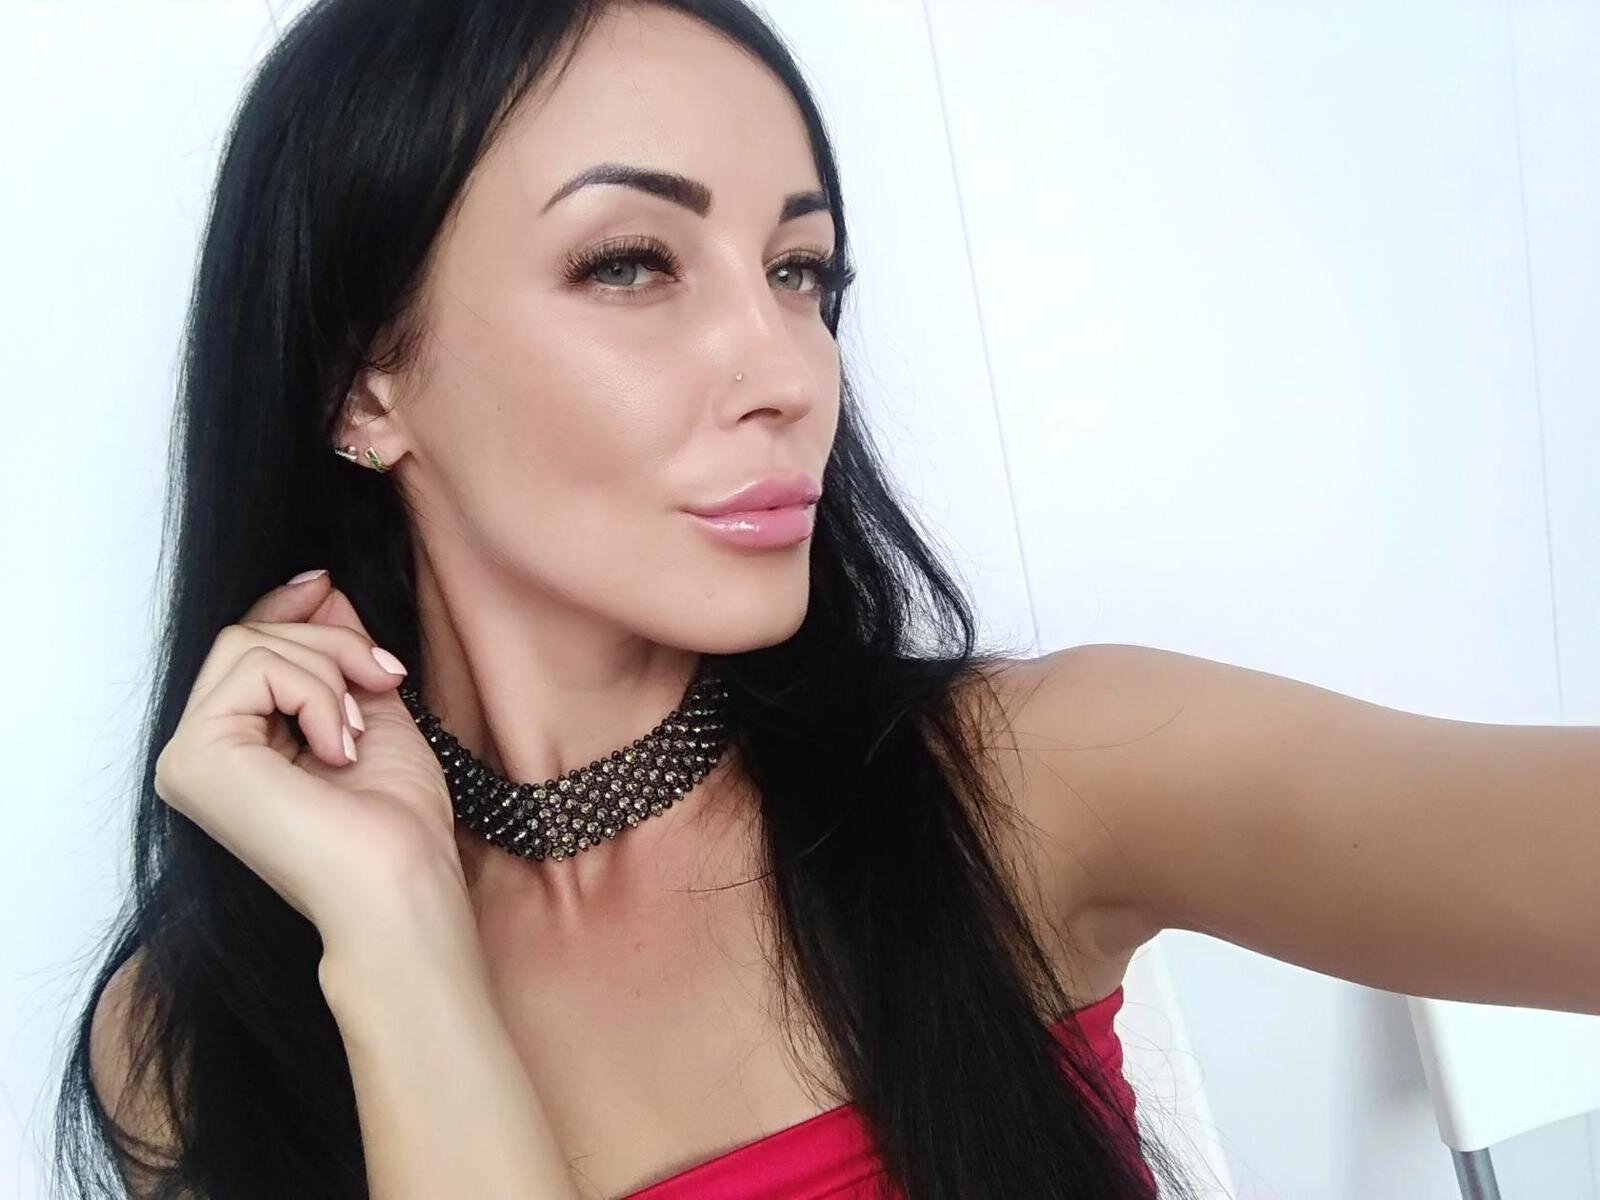 Free Live Sex Chat With sweettasteforu